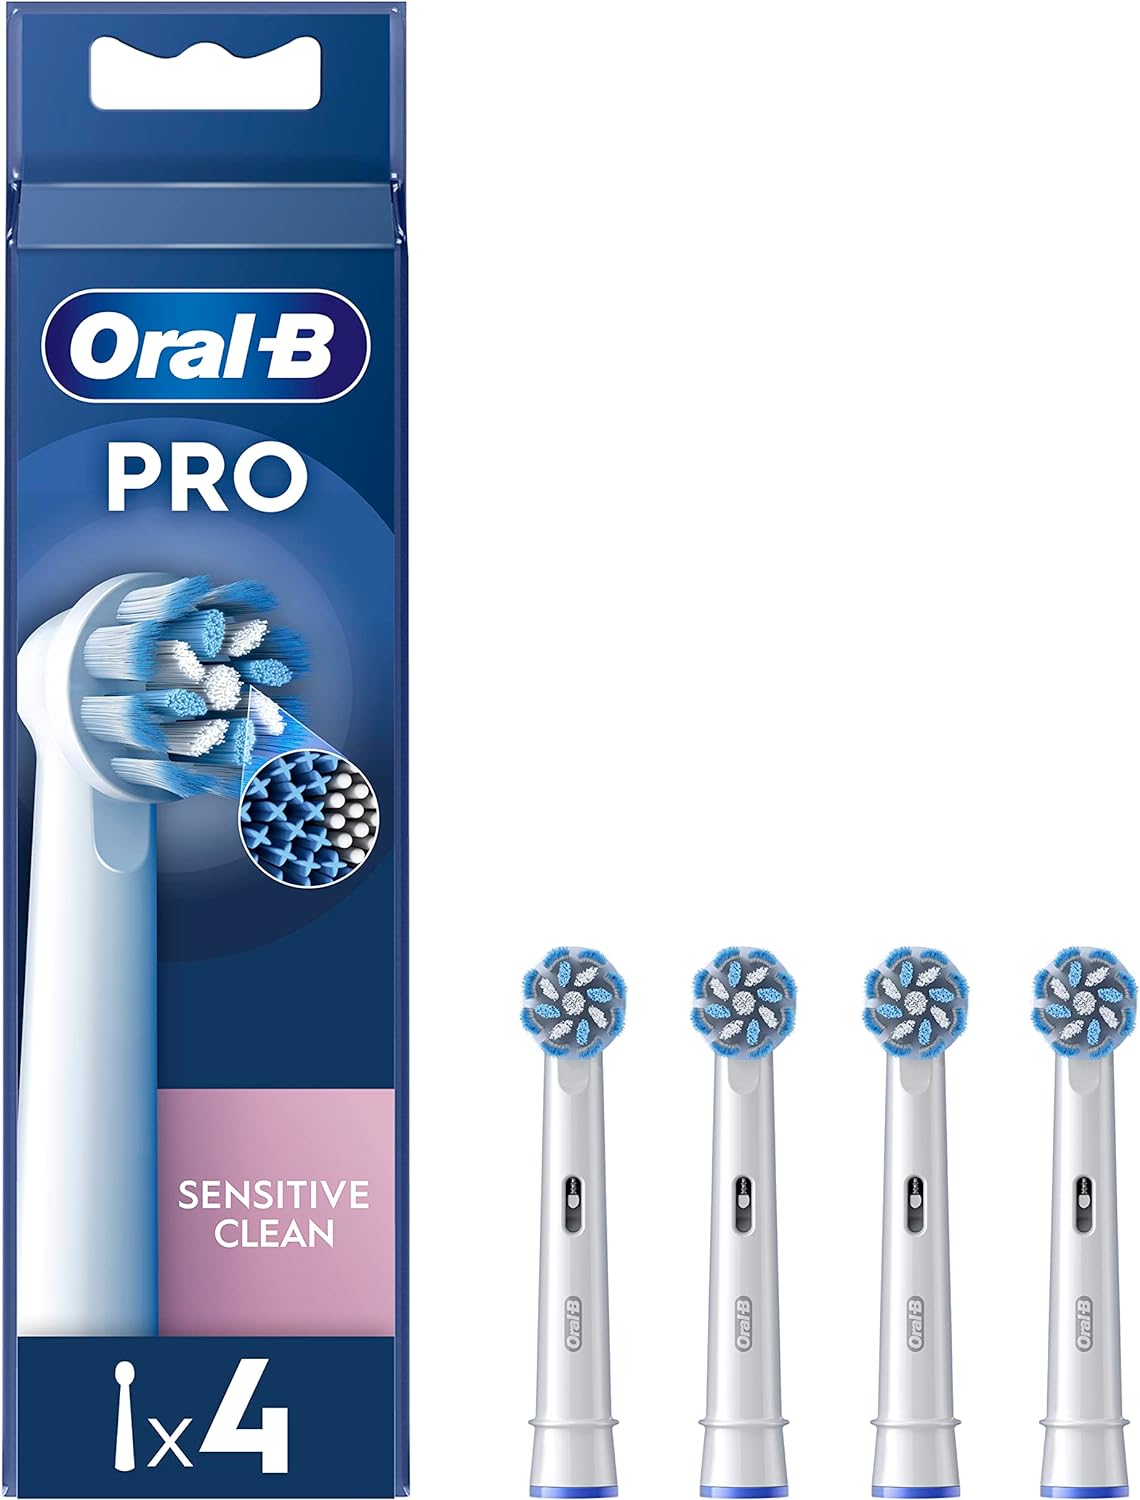 Oral-B Pro Sensitive Clean Electric Toothbrush Heads - 4 Pack